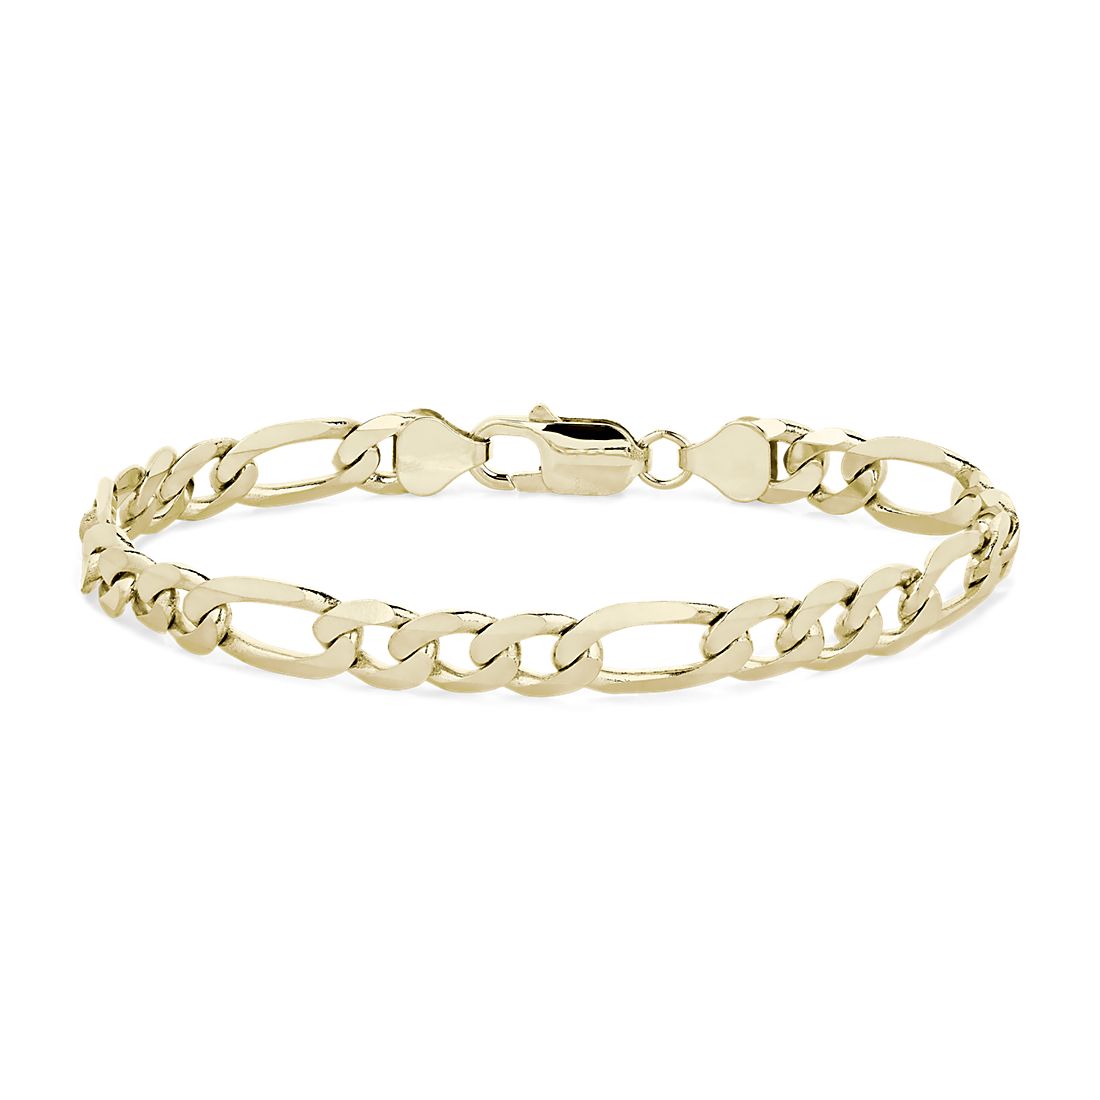 7.5 14k Yellow Gold Bracelet with Lobster Claw Clasp